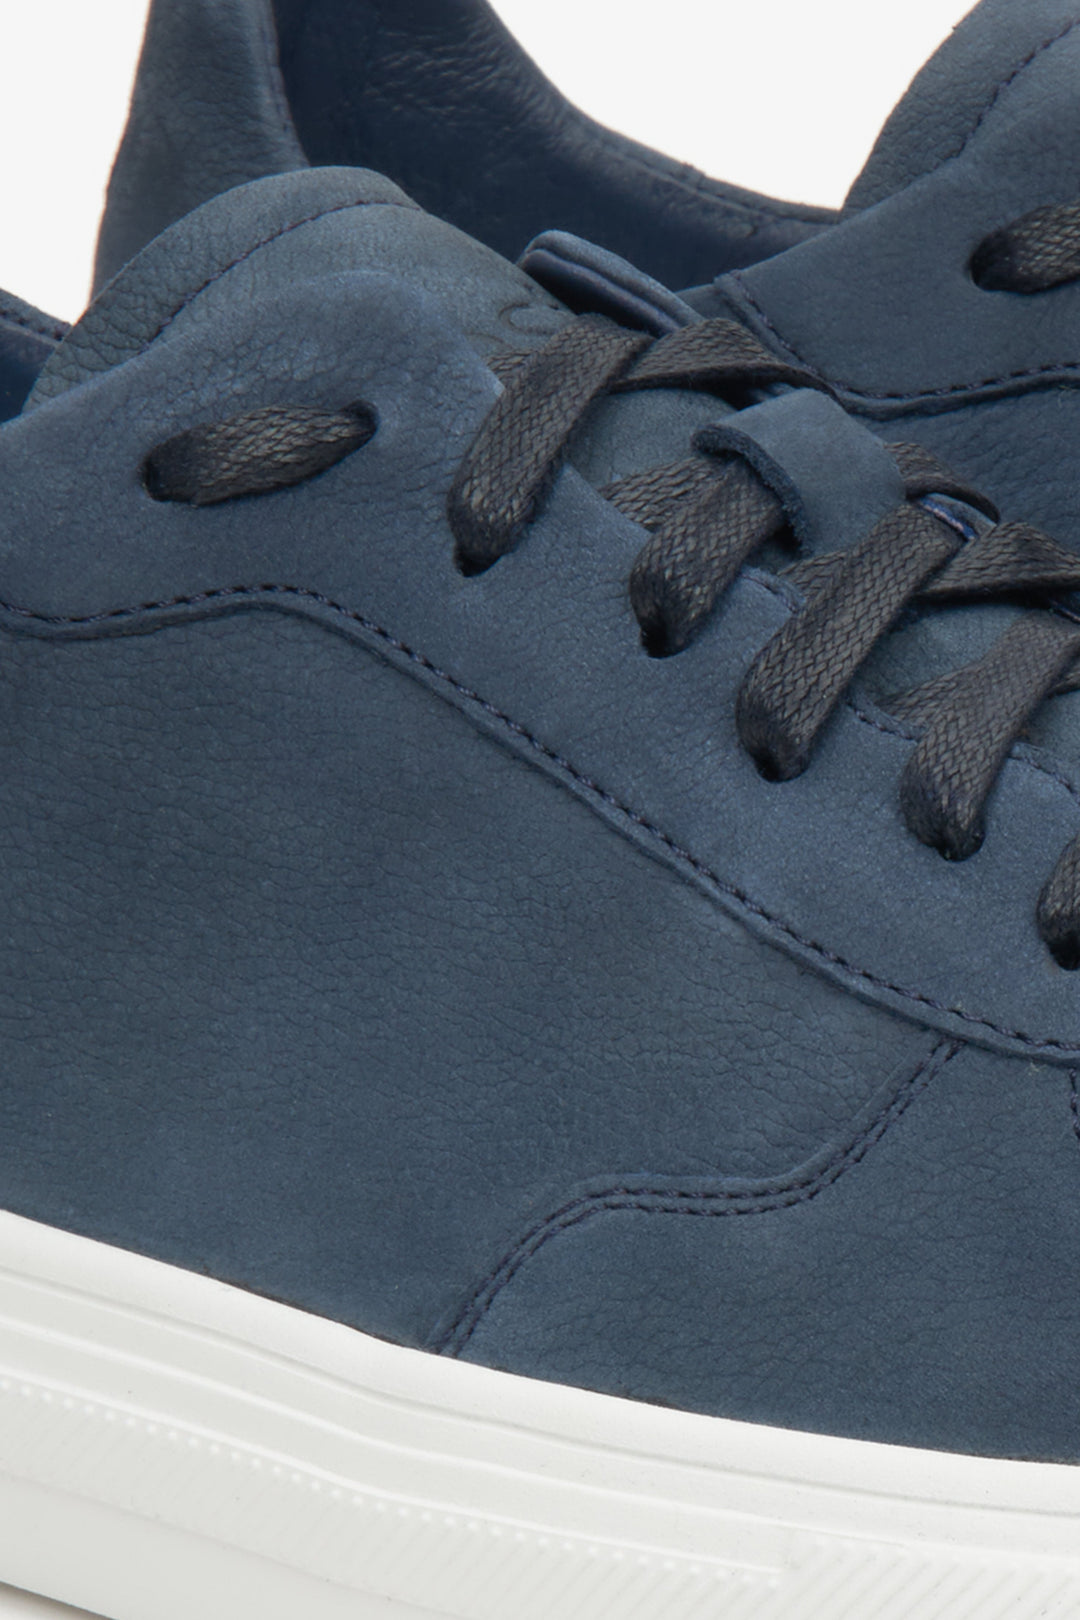 Fall men's Estro sneakers in blue - close-up of the lacing system and stitching.